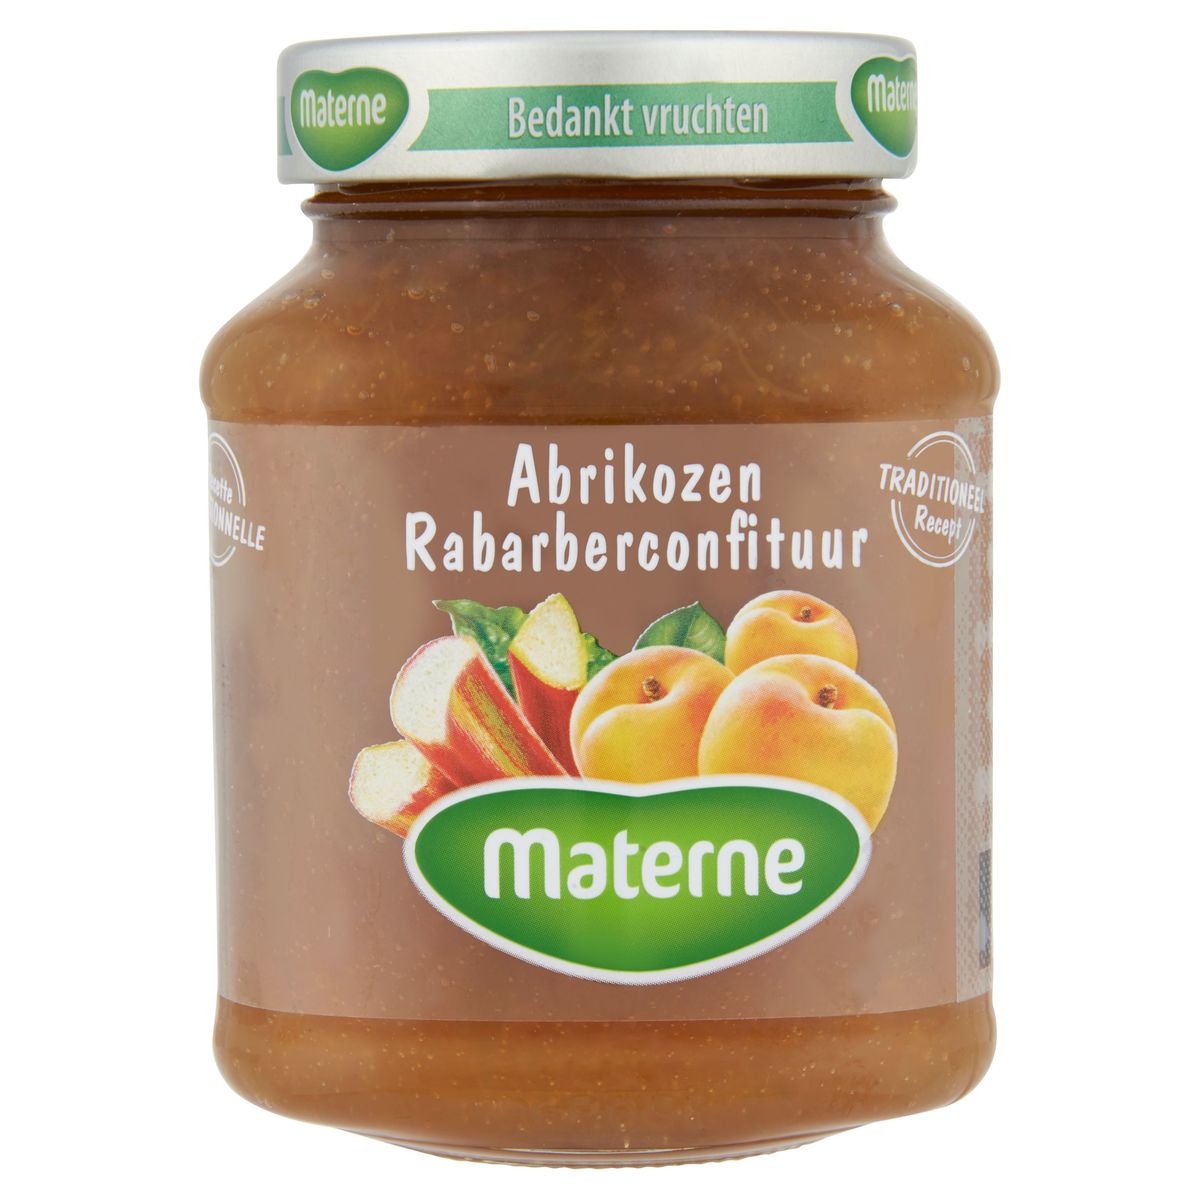 Materne Confiture d'Abricots & Rhubarbe 450 g